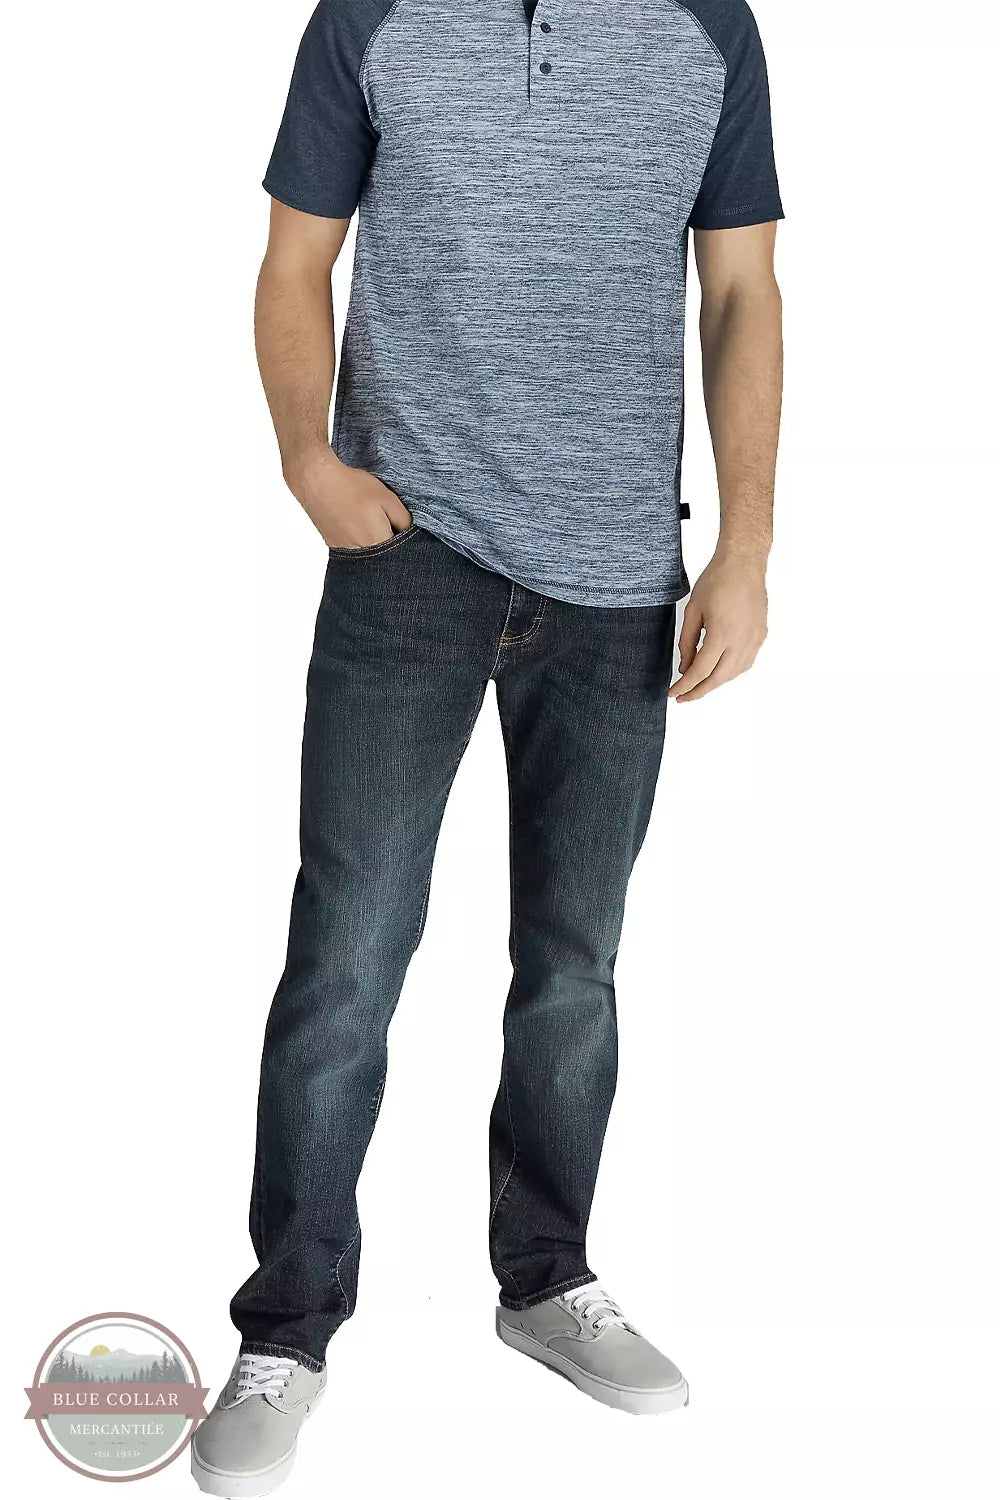 Lee 2015437 Extreme Motion Slim Straight Leg Jeans in Maverick Front View